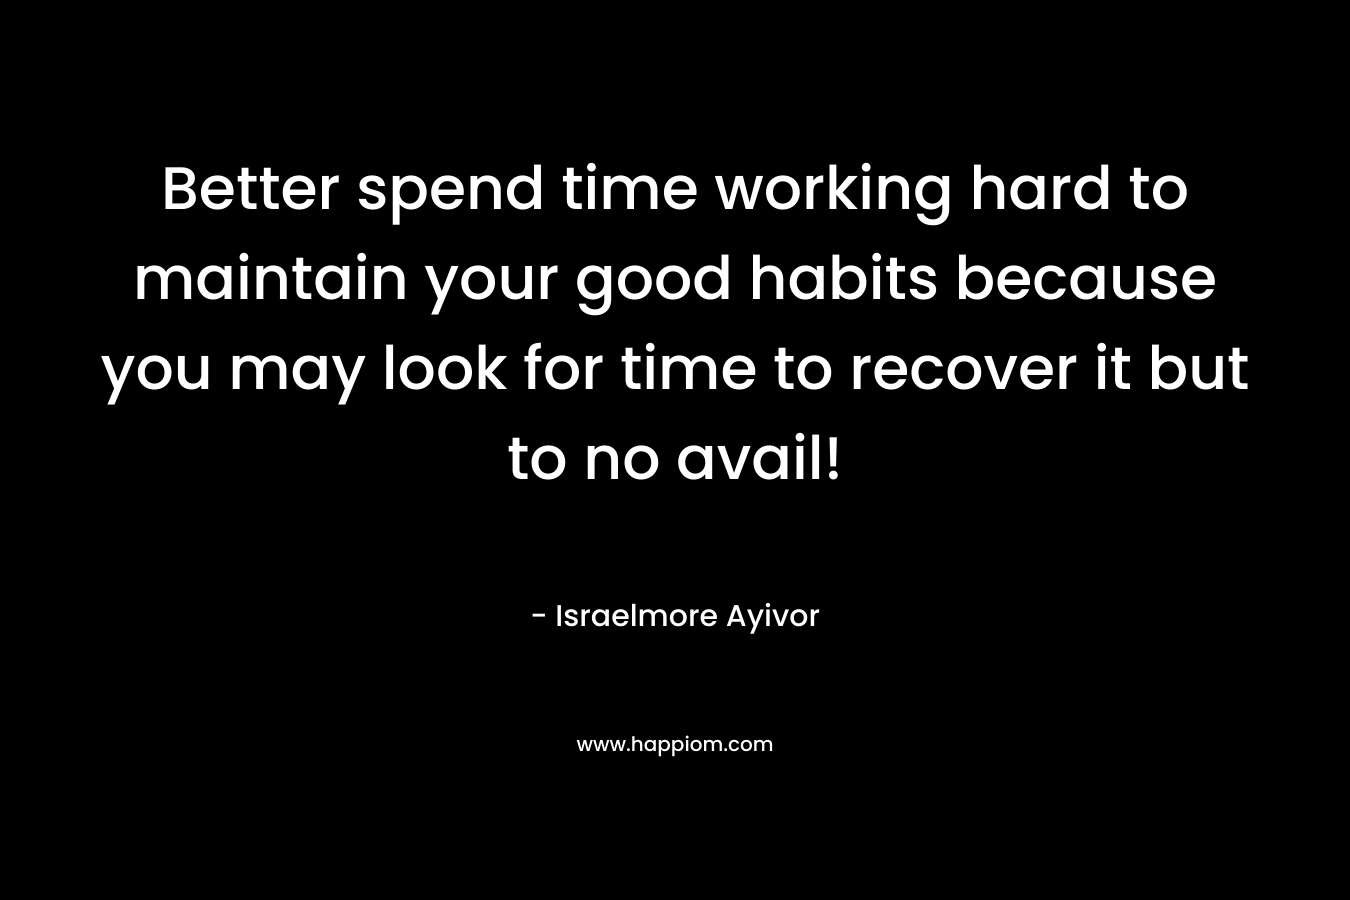 Better spend time working hard to maintain your good habits because you may look for time to recover it but to no avail!